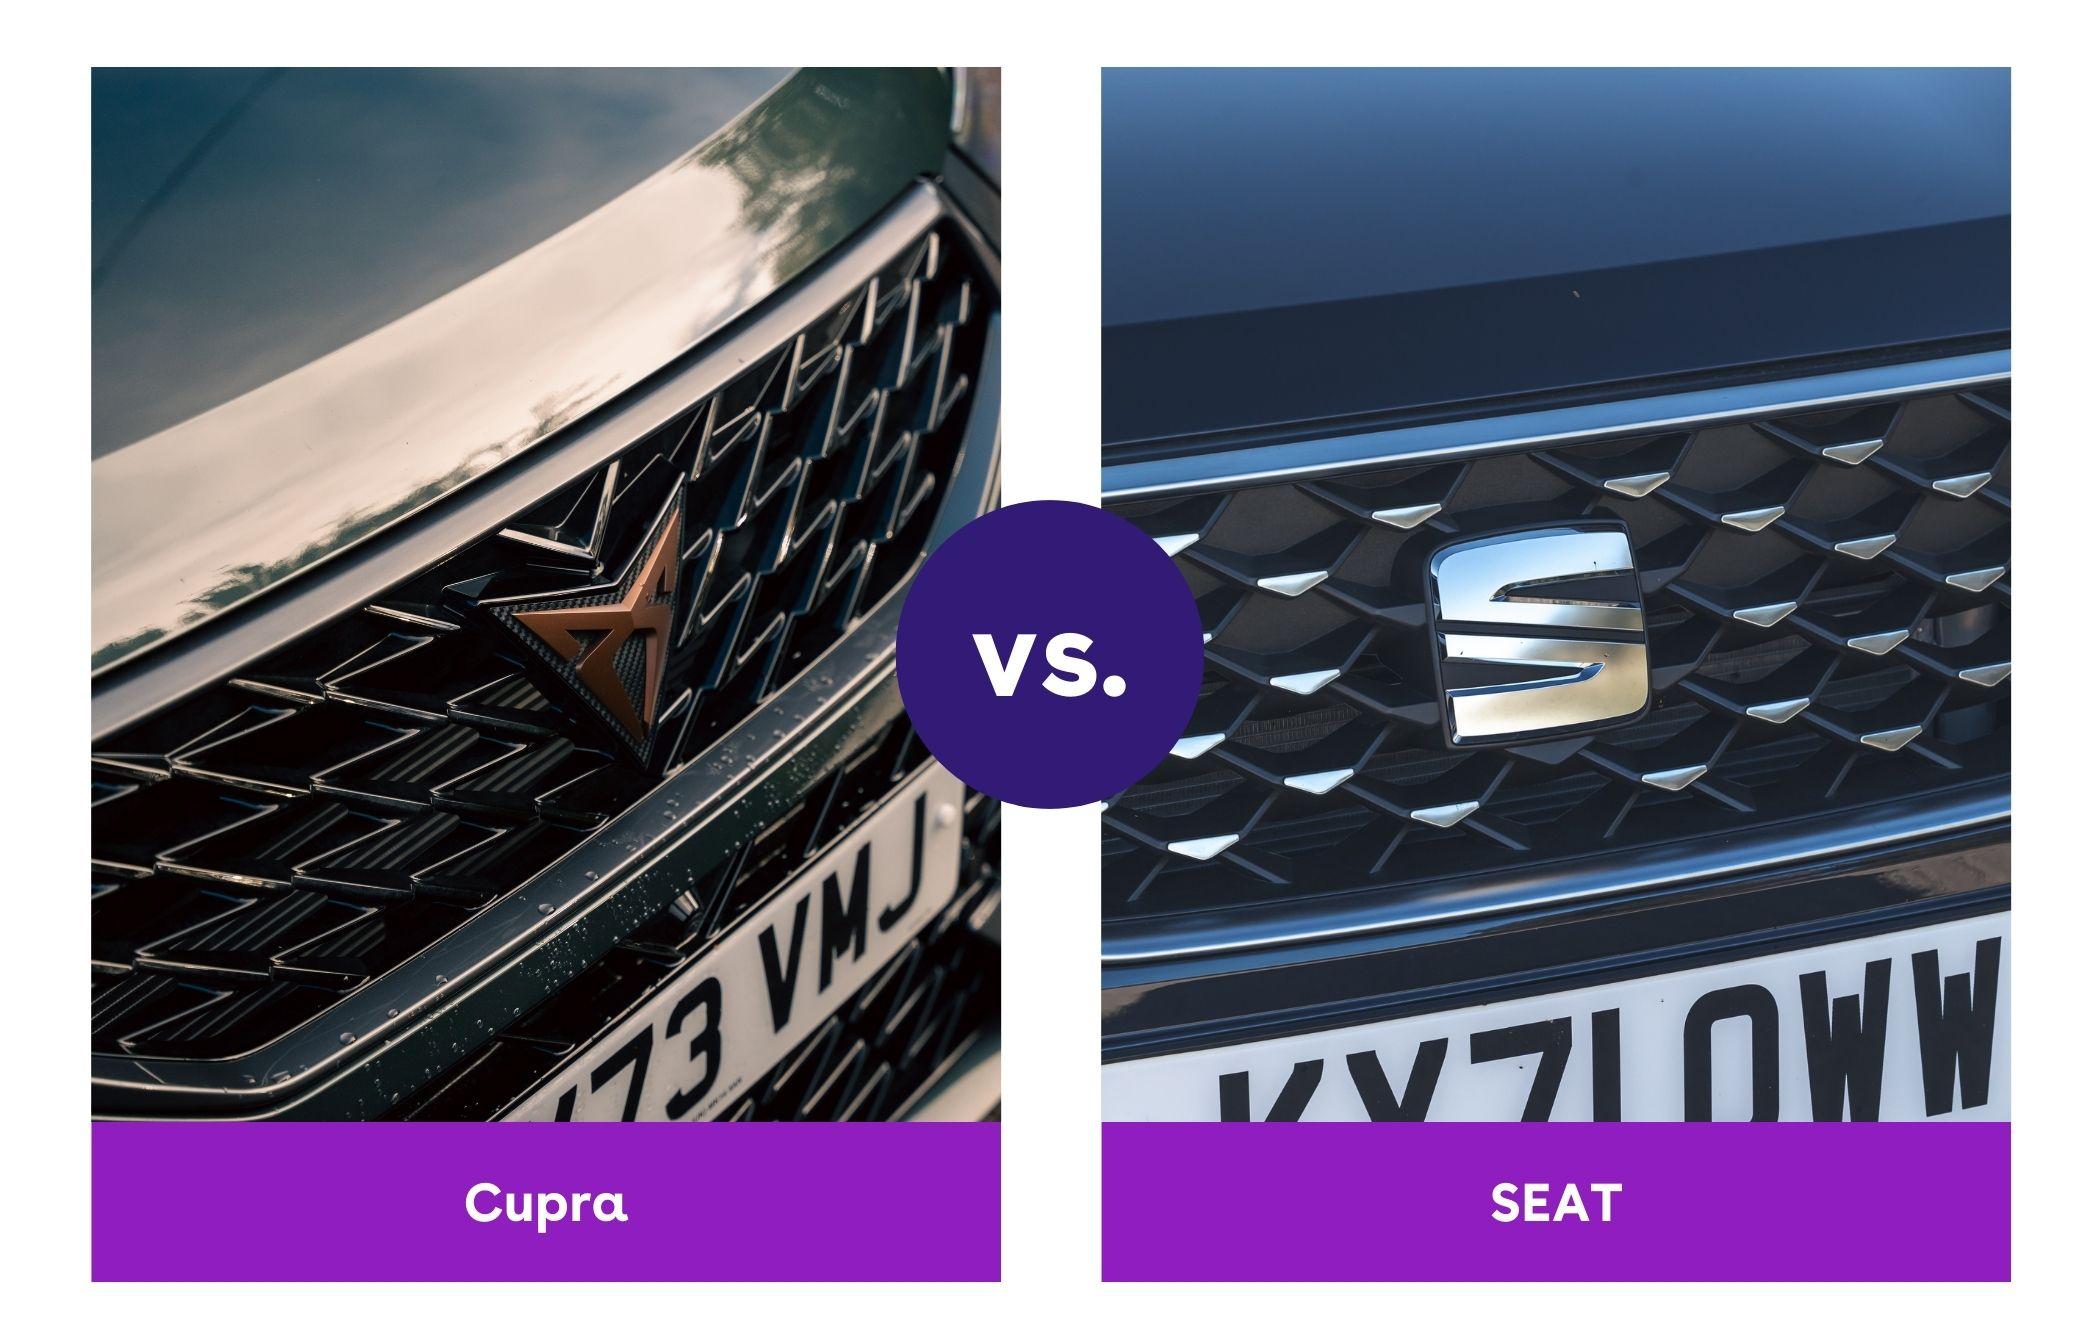 Side-by-side view of Cupra and SEAT badges on car grilles